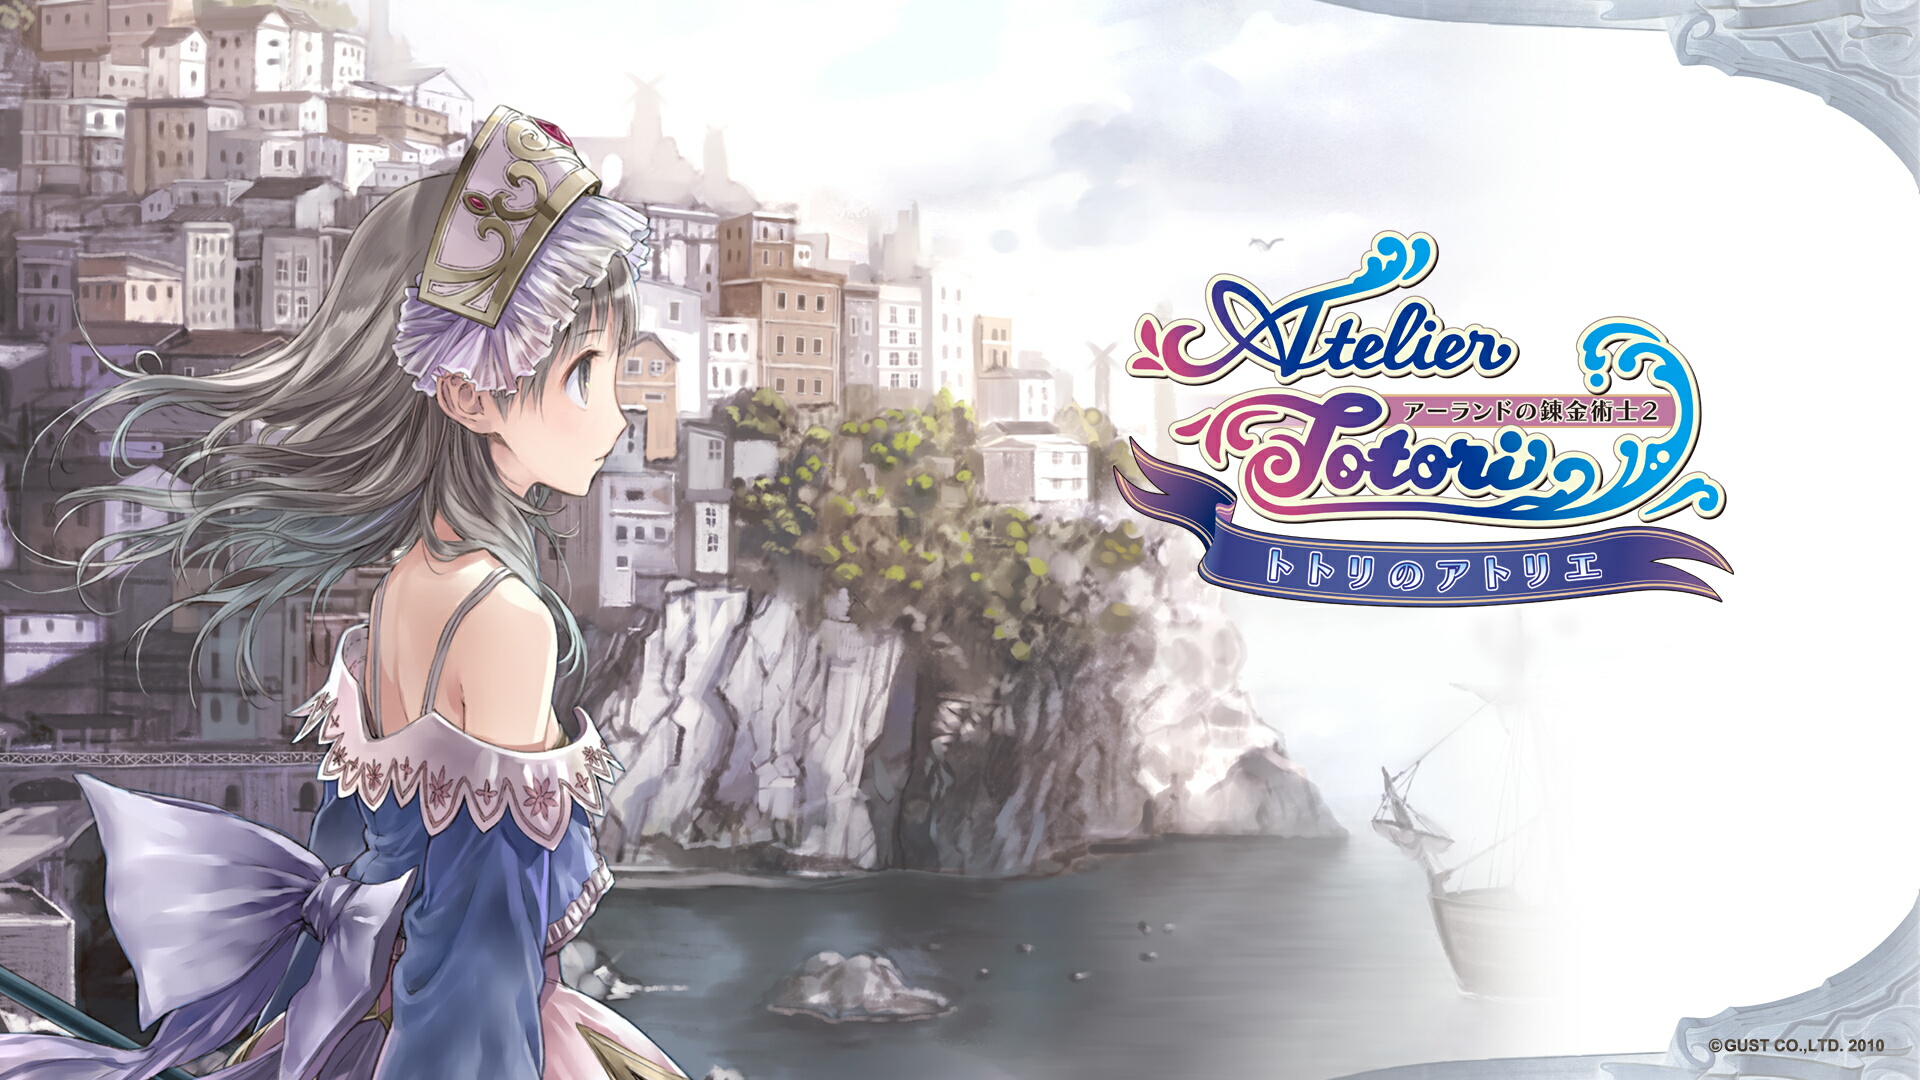 Video Game Atelier Totori HD Wallpaper | Background Image